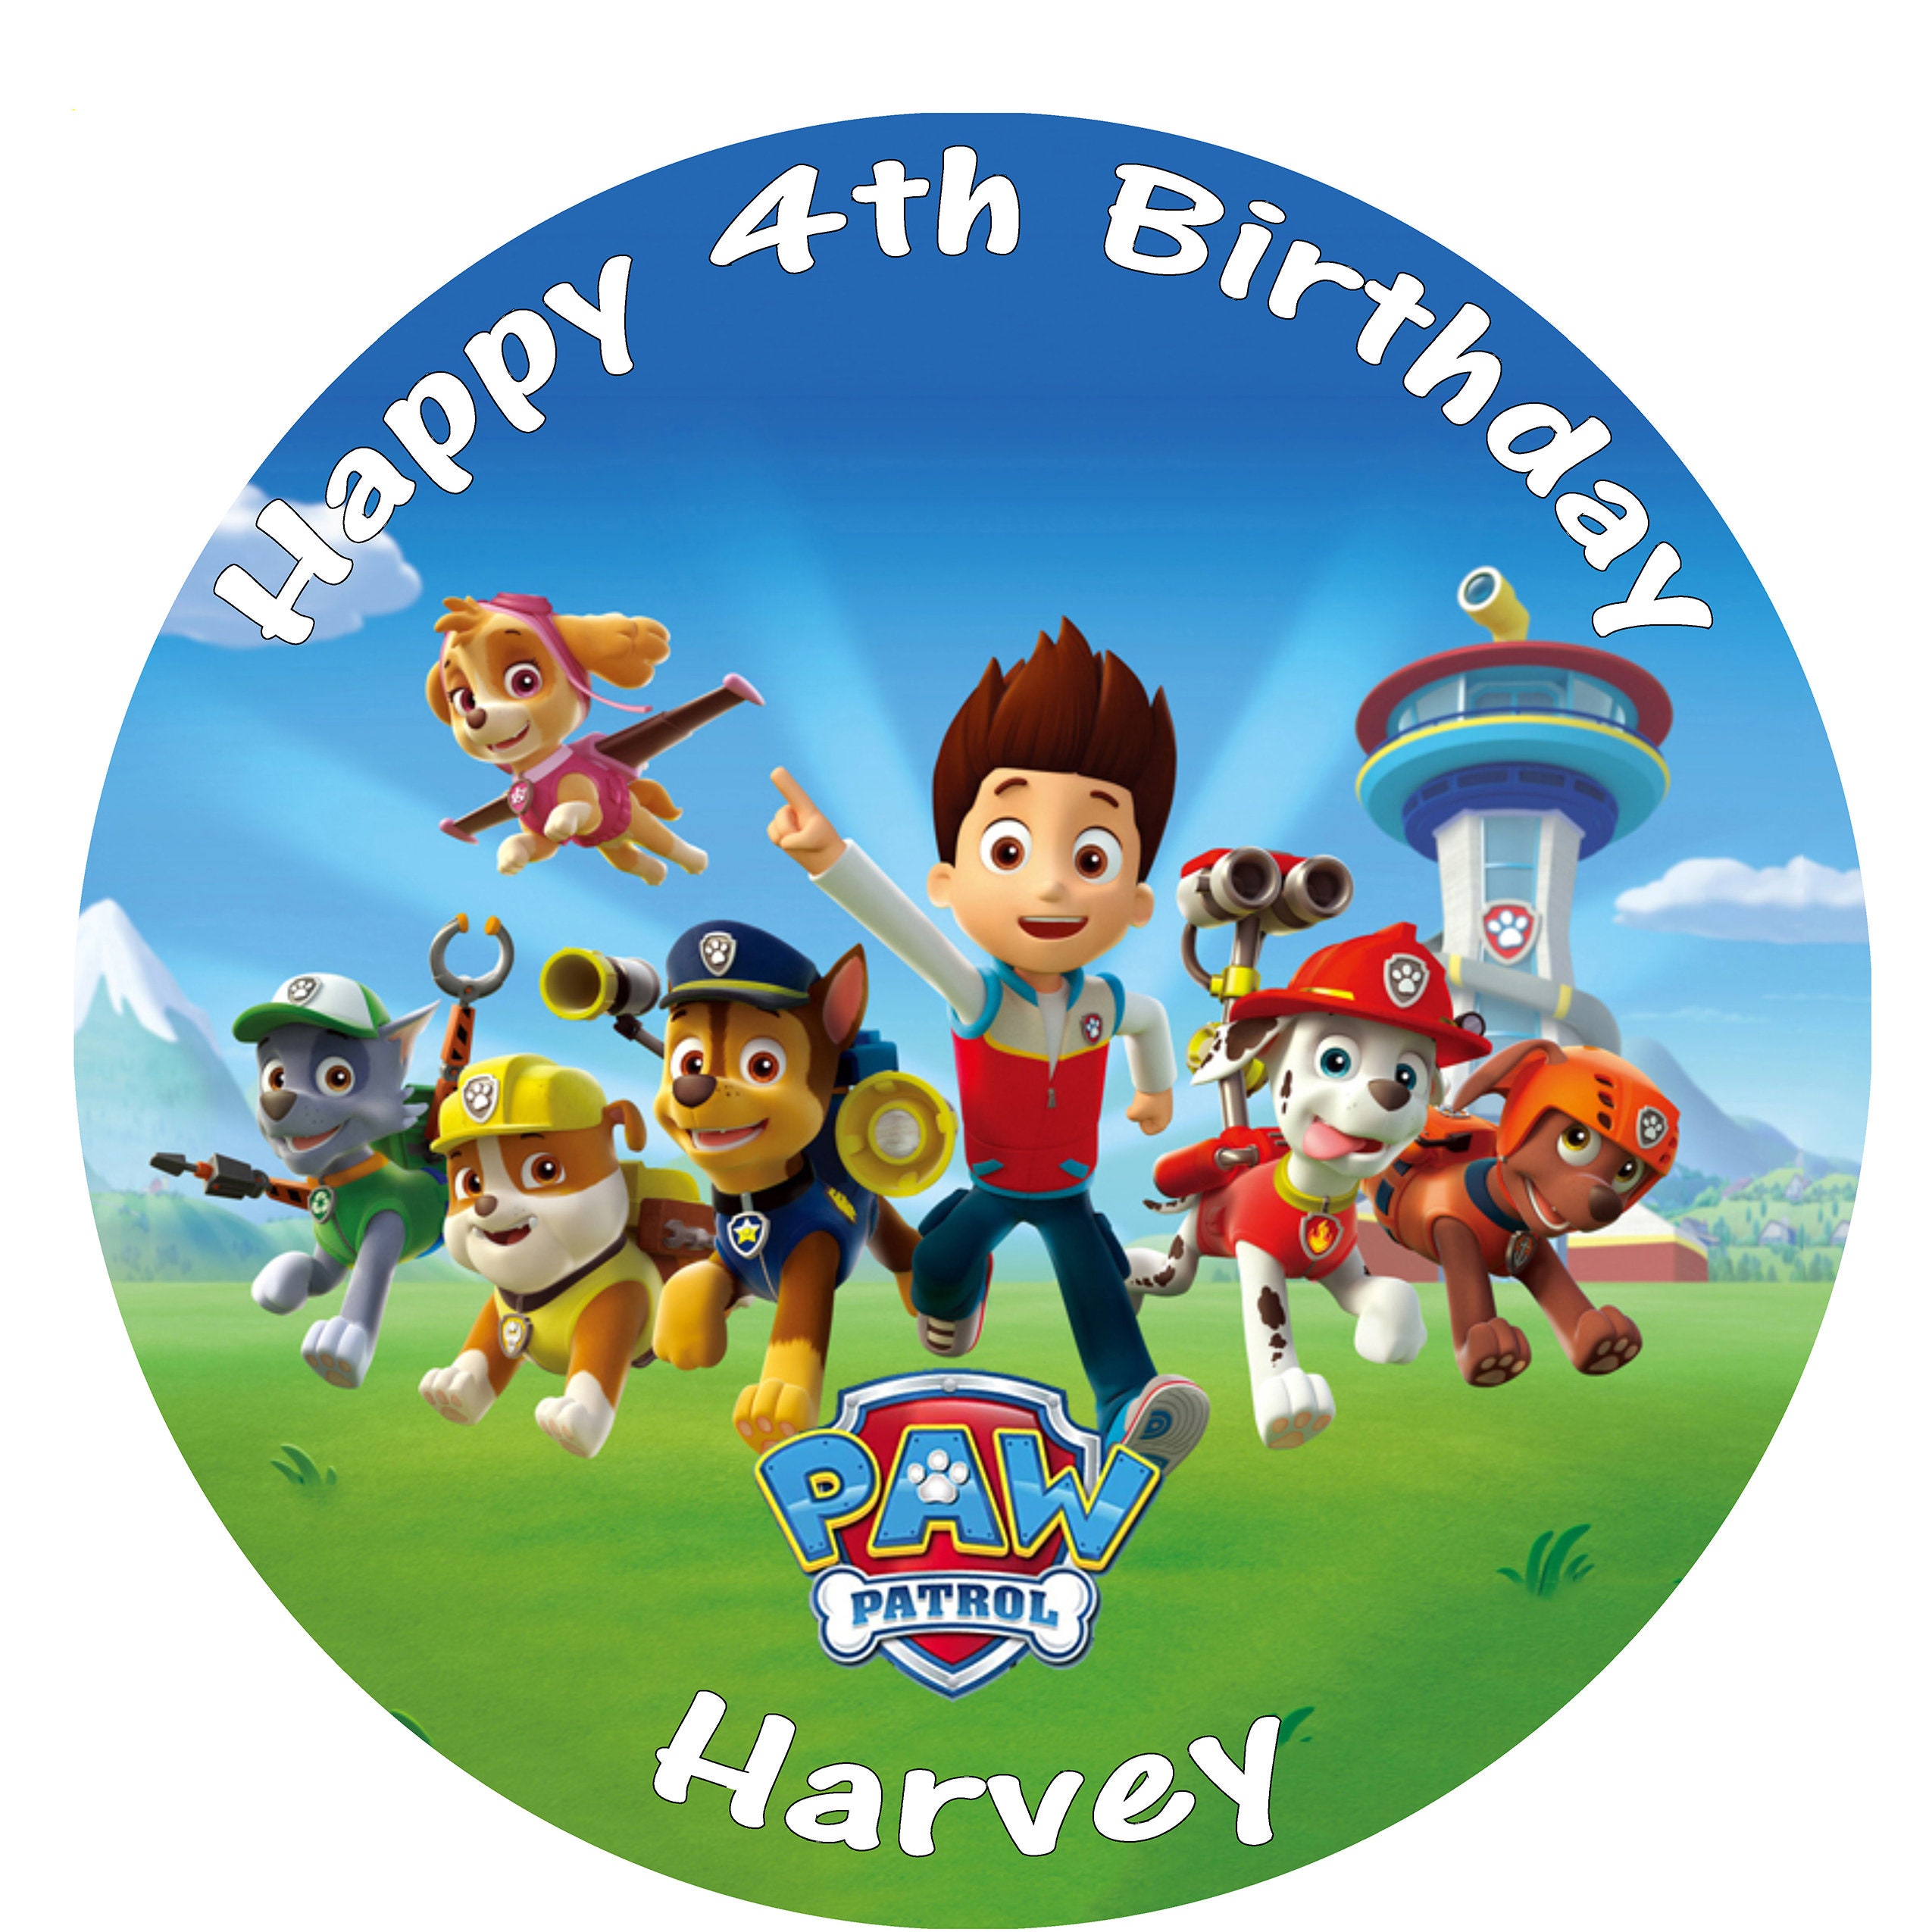 PAW PATROL LOGO EDIBLE ICING CAKE DECORATION PERSONALISED OR PLAIN TOPPER 